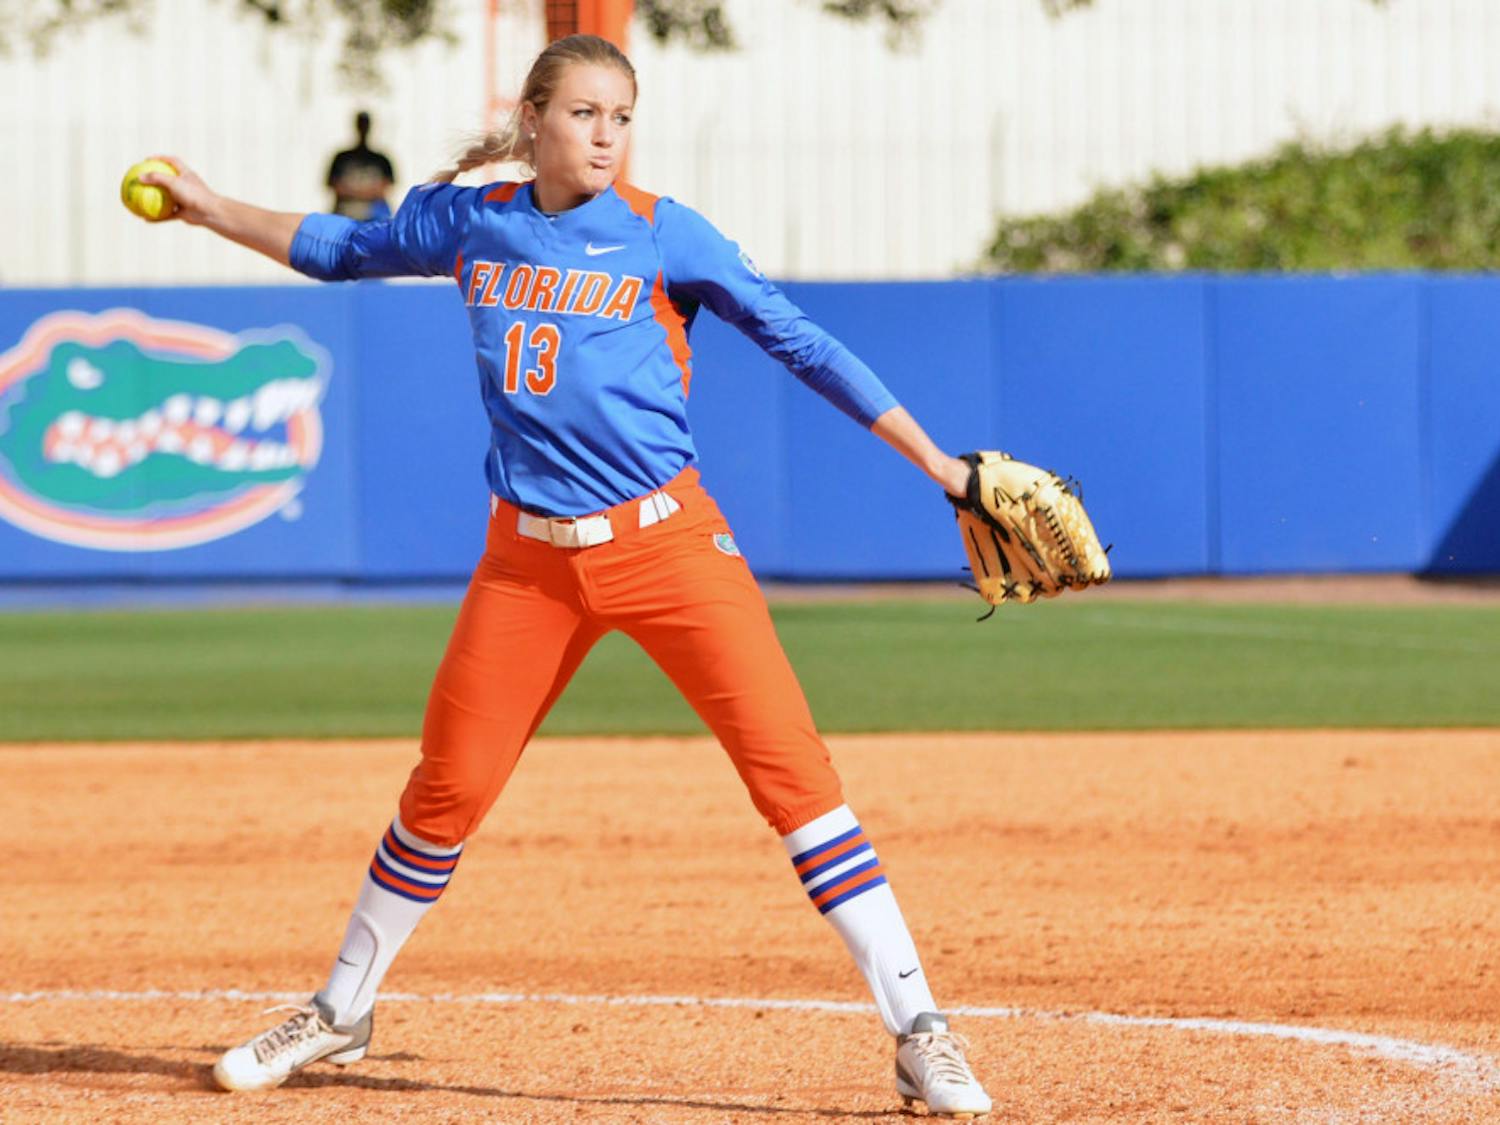 Hannah Rogers pitches during Florida’s 8-0 win against Indiana on Feb. 22 at Katie Seashole Pressly Stadium.